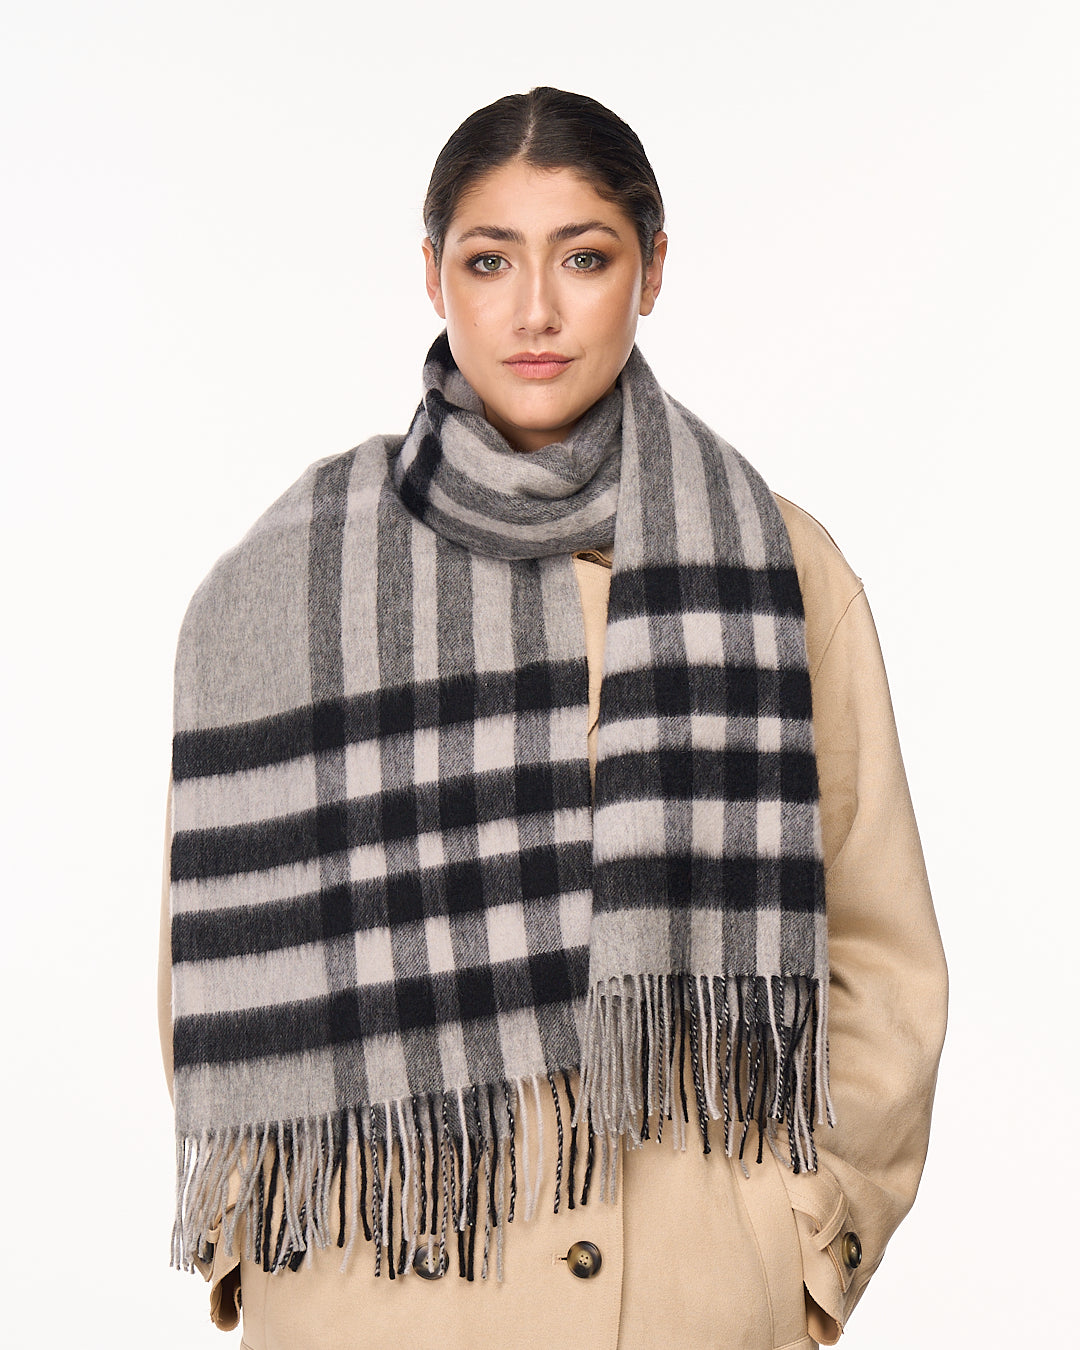 Wool and cashmere luxury brand